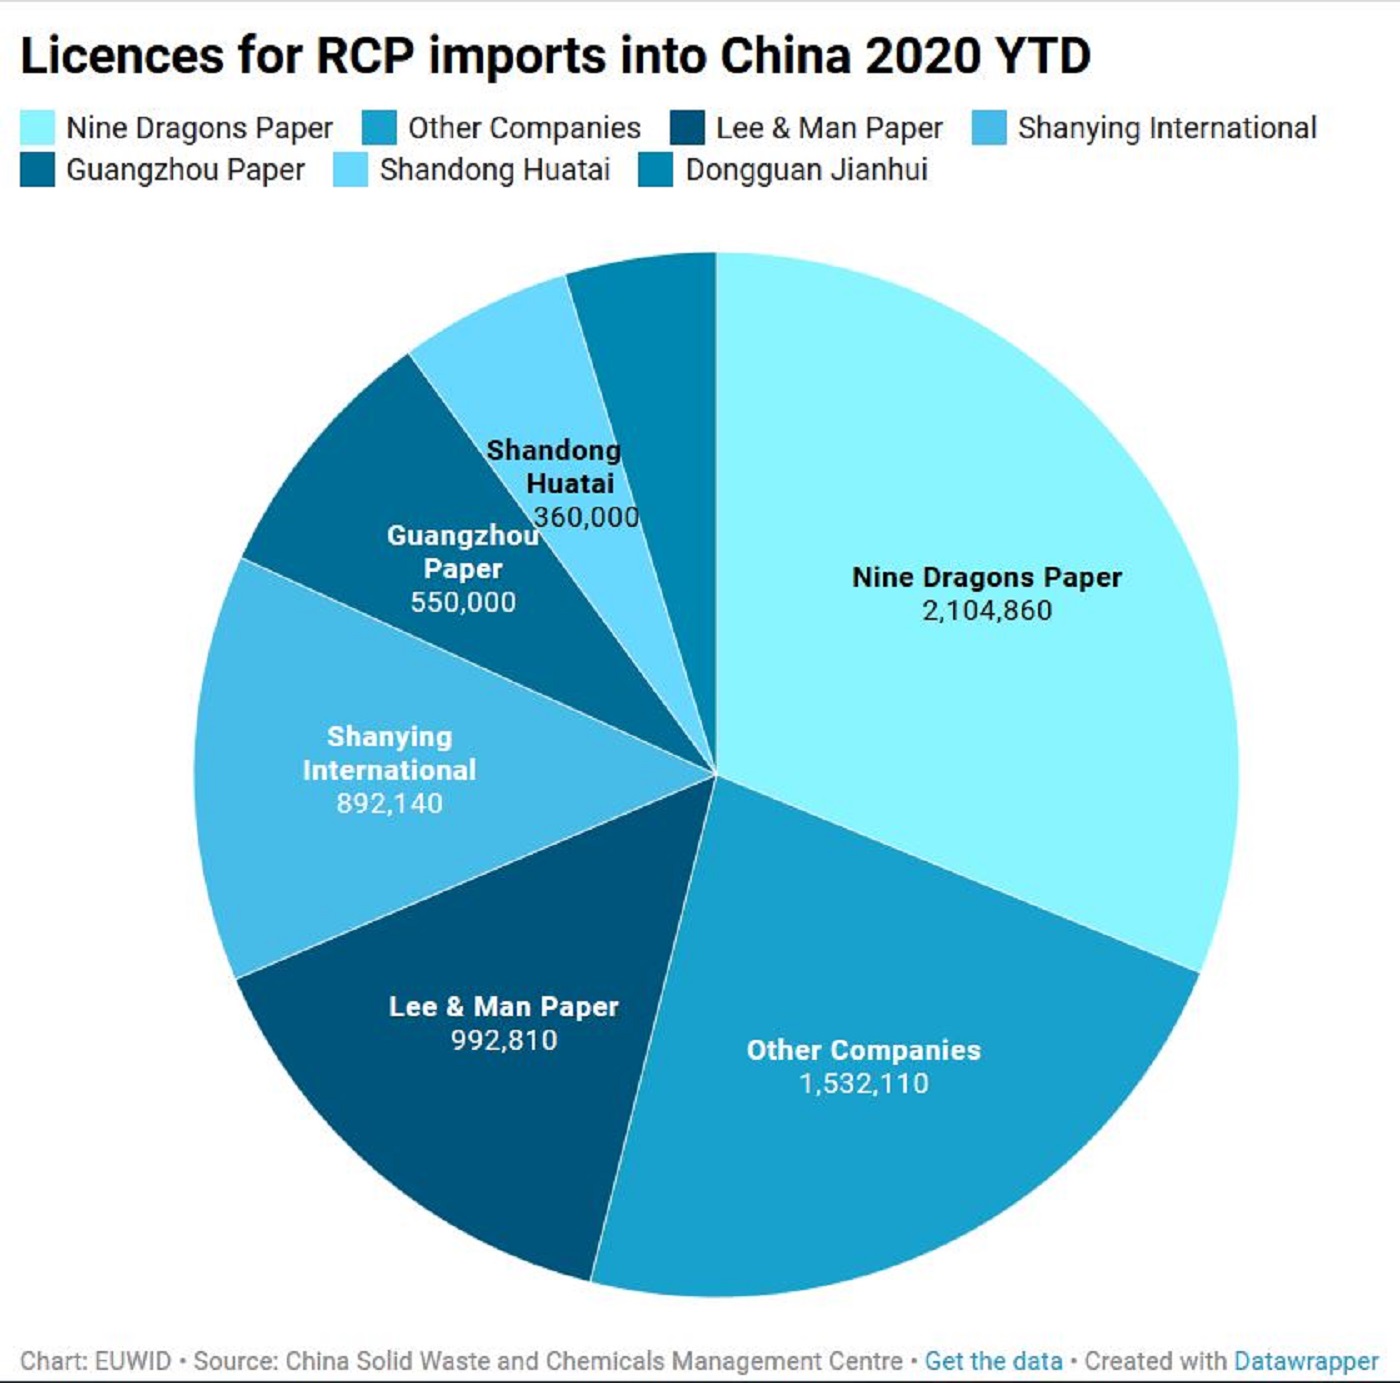 Another last-minute batch of licences for RCP imports into China